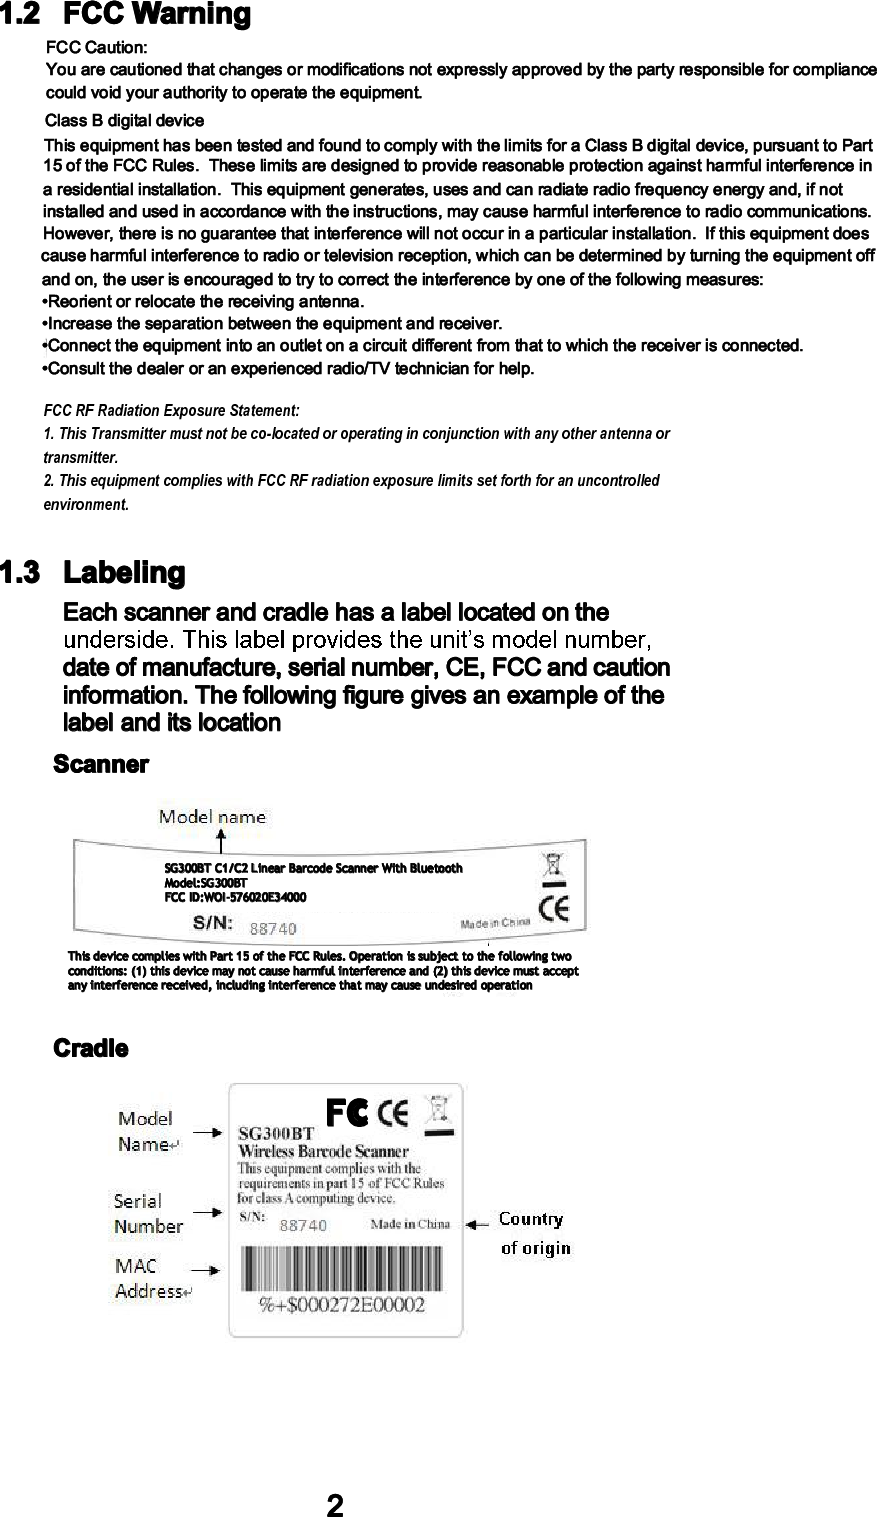 21.2 FCC Warning  1.3 LabelingEach scanner and cradle has a label located on the date of manufacture, serial number, CE, FCC and caution information. The following figure gives an example of the label and its locationScannerCradleThis device complies with Part 15 of the FCC Rules. Operation is subject to the following two conditions: (1) this device may not cause harmful interference and (2) this device must accept any interference received, including interference that may cause undesired operationSG300BT C1/C2 Linear Barcode Scanner With BluetoothModel:SG300BTFCC ID:WOI-576020E34000FCcÚÝÝ Ý¿«¬·±²æÇ±« ¿®» ½¿«¬·±²»¼ ¬¸¿¬ ½¸¿²¹»- ±® ³±¼·º·½¿¬·±²- ²±¬ »¨°®»--´§ ¿°°®±ª»¼ ¾§ ¬¸» °¿®¬§ ®»-°±²-·¾´» º±® ½±³°´·¿²½» ½±«´¼ ª±·¼ §±«® ¿«¬¸±®·¬§ ¬± ±°»®¿¬» ¬¸» »¯«·°³»²¬ò Ý´¿-- Þ ¼·¹·¬¿´ ¼»ª·½»Ì¸·- »¯«·°³»²¬ ¸¿- ¾»»² ¬»-¬»¼ ¿²¼ º±«²¼ ¬± ½±³°´§ ©·¬¸ ¬¸» ´·³·¬- º±® ¿ Ý´¿-- Þ ¼·¹·¬¿´ ¼»ª·½»ô °«®-«¿²¬ ¬± Ð¿®¬ ïë ±º ¬¸» ÚÝÝ Î«´»-ò  Ì¸»-» ´·³·¬- ¿®» ¼»-·¹²»¼ ¬± °®±ª·¼» ®»¿-±²¿¾´» °®±¬»½¬·±² ¿¹¿·²-¬ ¸¿®³º«´ ·²¬»®º»®»²½» ·² ¿ ®»-·¼»²¬·¿´ ·²-¬¿´´¿¬·±²ò  Ì¸·- »¯«·°³»²¬ ¹»²»®¿¬»-ô «-»- ¿²¼ ½¿² ®¿¼·¿¬» ®¿¼·± º®»¯«»²½§ »²»®¹§ ¿²¼ô ·º ²±¬ ·²-¬¿´´»¼ ¿²¼ «-»¼ ·² ¿½½±®¼¿²½» ©·¬¸ ¬¸» ·²-¬®«½¬·±²-ô ³¿§ ½¿«-» ¸¿®³º«´ ·²¬»®º»®»²½» ¬± ®¿¼·± ½±³³«²·½¿¬·±²-òØ±©»ª»®ô ¬¸»®» ·- ²± ¹«¿®¿²¬»» ¬¸¿¬ ·²¬»®º»®»²½» ©·´´ ²±¬ ±½½«® ·² ¿ °¿®¬·½«´¿® ·²-¬¿´´¿¬·±²ò  ×º ¬¸·- »¯«·°³»²¬ ¼±»- ½¿«-» ¸¿®³º«´ ·²¬»®º»®»²½» ¬± ®¿¼·± ±® ¬»´»ª·-·±² ®»½»°¬·±²ô ©¸·½¸ ½¿² ¾» ¼»¬»®³·²»¼ ¾§ ¬«®²·²¹ ¬¸» »¯«·°³»²¬ ±ºº ¿²¼ ±²ô ¬¸» «-»® ·- »²½±«®¿¹»¼ ¬± ¬®§ ¬± ½±®®»½¬ ¬¸» ·²¬»®º»®»²½» ¾§ ±²» ±º ¬¸» º±´´±©·²¹ ³»¿-«®»-æ¡Î»±®·»²¬ ±® ®»´±½¿¬» ¬¸» ®»½»·ª·²¹ ¿²¬»²²¿ò¡×²½®»¿-» ¬¸» -»°¿®¿¬·±² ¾»¬©»»² ¬¸» »¯«·°³»²¬ ¿²¼ ®»½»·ª»®ò¡Ý±²²»½¬ ¬¸» »¯«·°³»²¬ ·²¬± ¿² ±«¬´»¬ ±² ¿ ½·®½«·¬ ¼·ºº»®»²¬ º®±³ ¬¸¿¬ ¬± ©¸·½¸ ¬¸» ®»½»·ª»® ·- ½±²²»½¬»¼ò¡Ý±²-«´¬ ¬¸» ¼»¿´»® ±® ¿² »¨°»®·»²½»¼ ®¿¼·±ñÌÊ ¬»½¸²·½·¿² º±® ¸»´°òFCC RF Radiation Exposure Statement: 1. This Transmitter must not be co-located or operating in conjunction with any other antenna or transmitter. 2. This equipment complies with FCC RF radiation exposure limits set forth for an uncontrolled environment. 